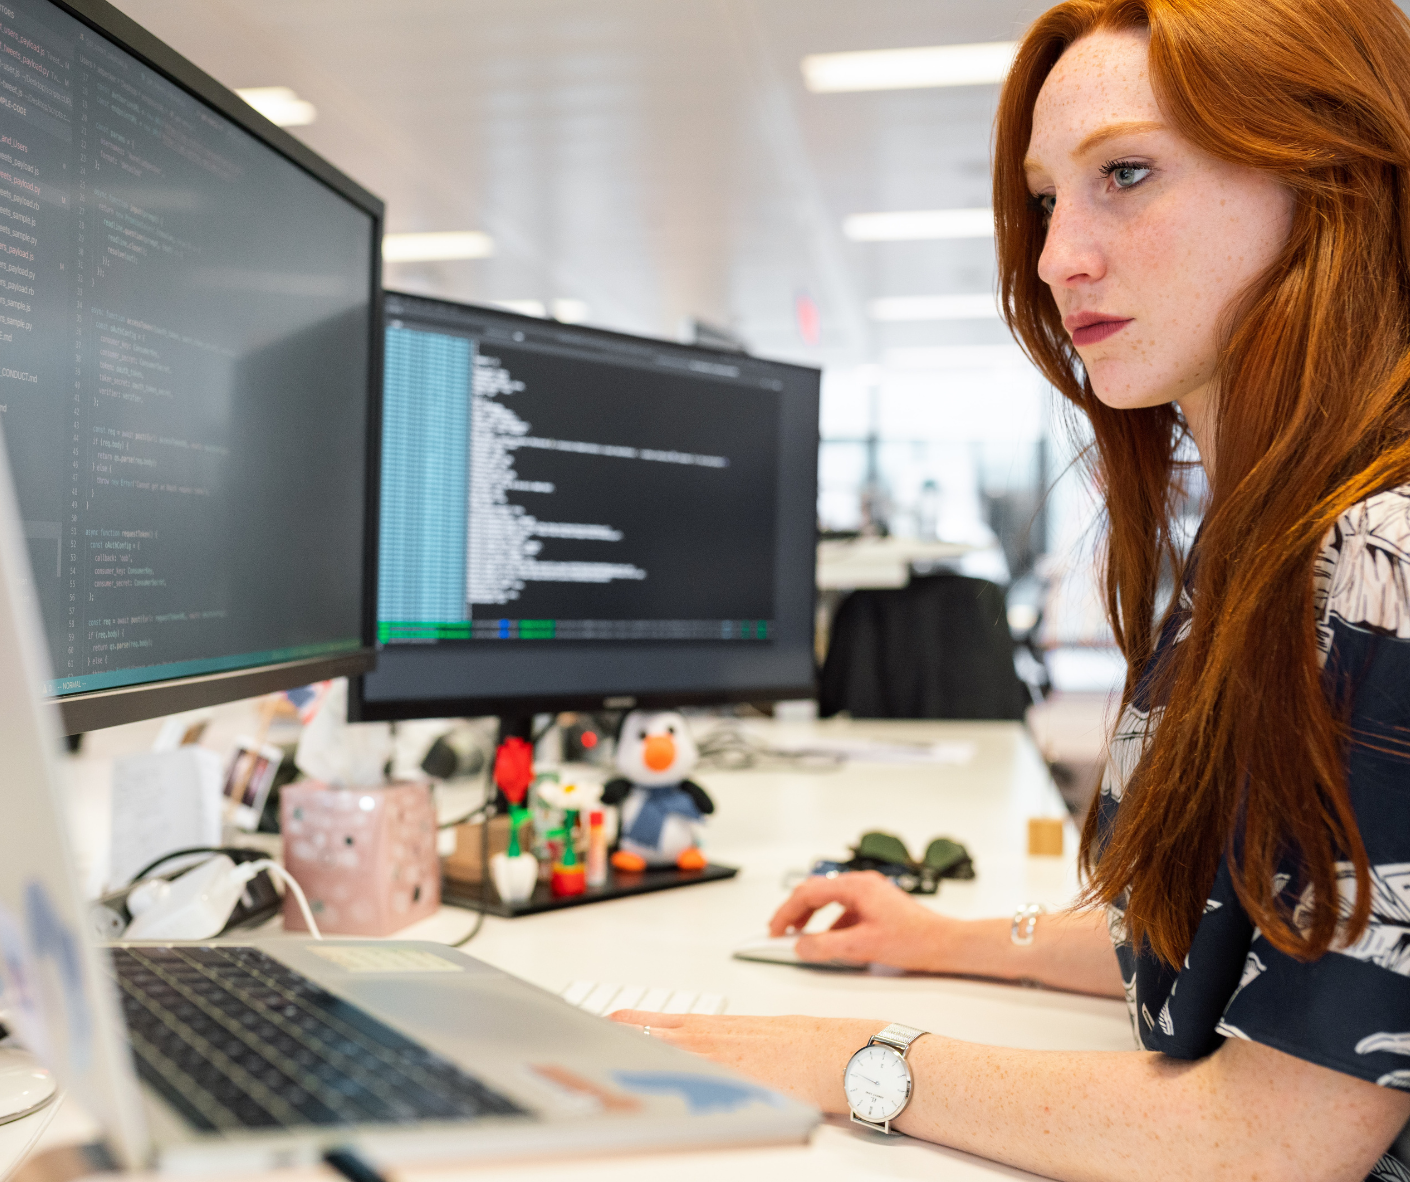 red-haired-woman-looking-at-3-monitors-on-work-desk